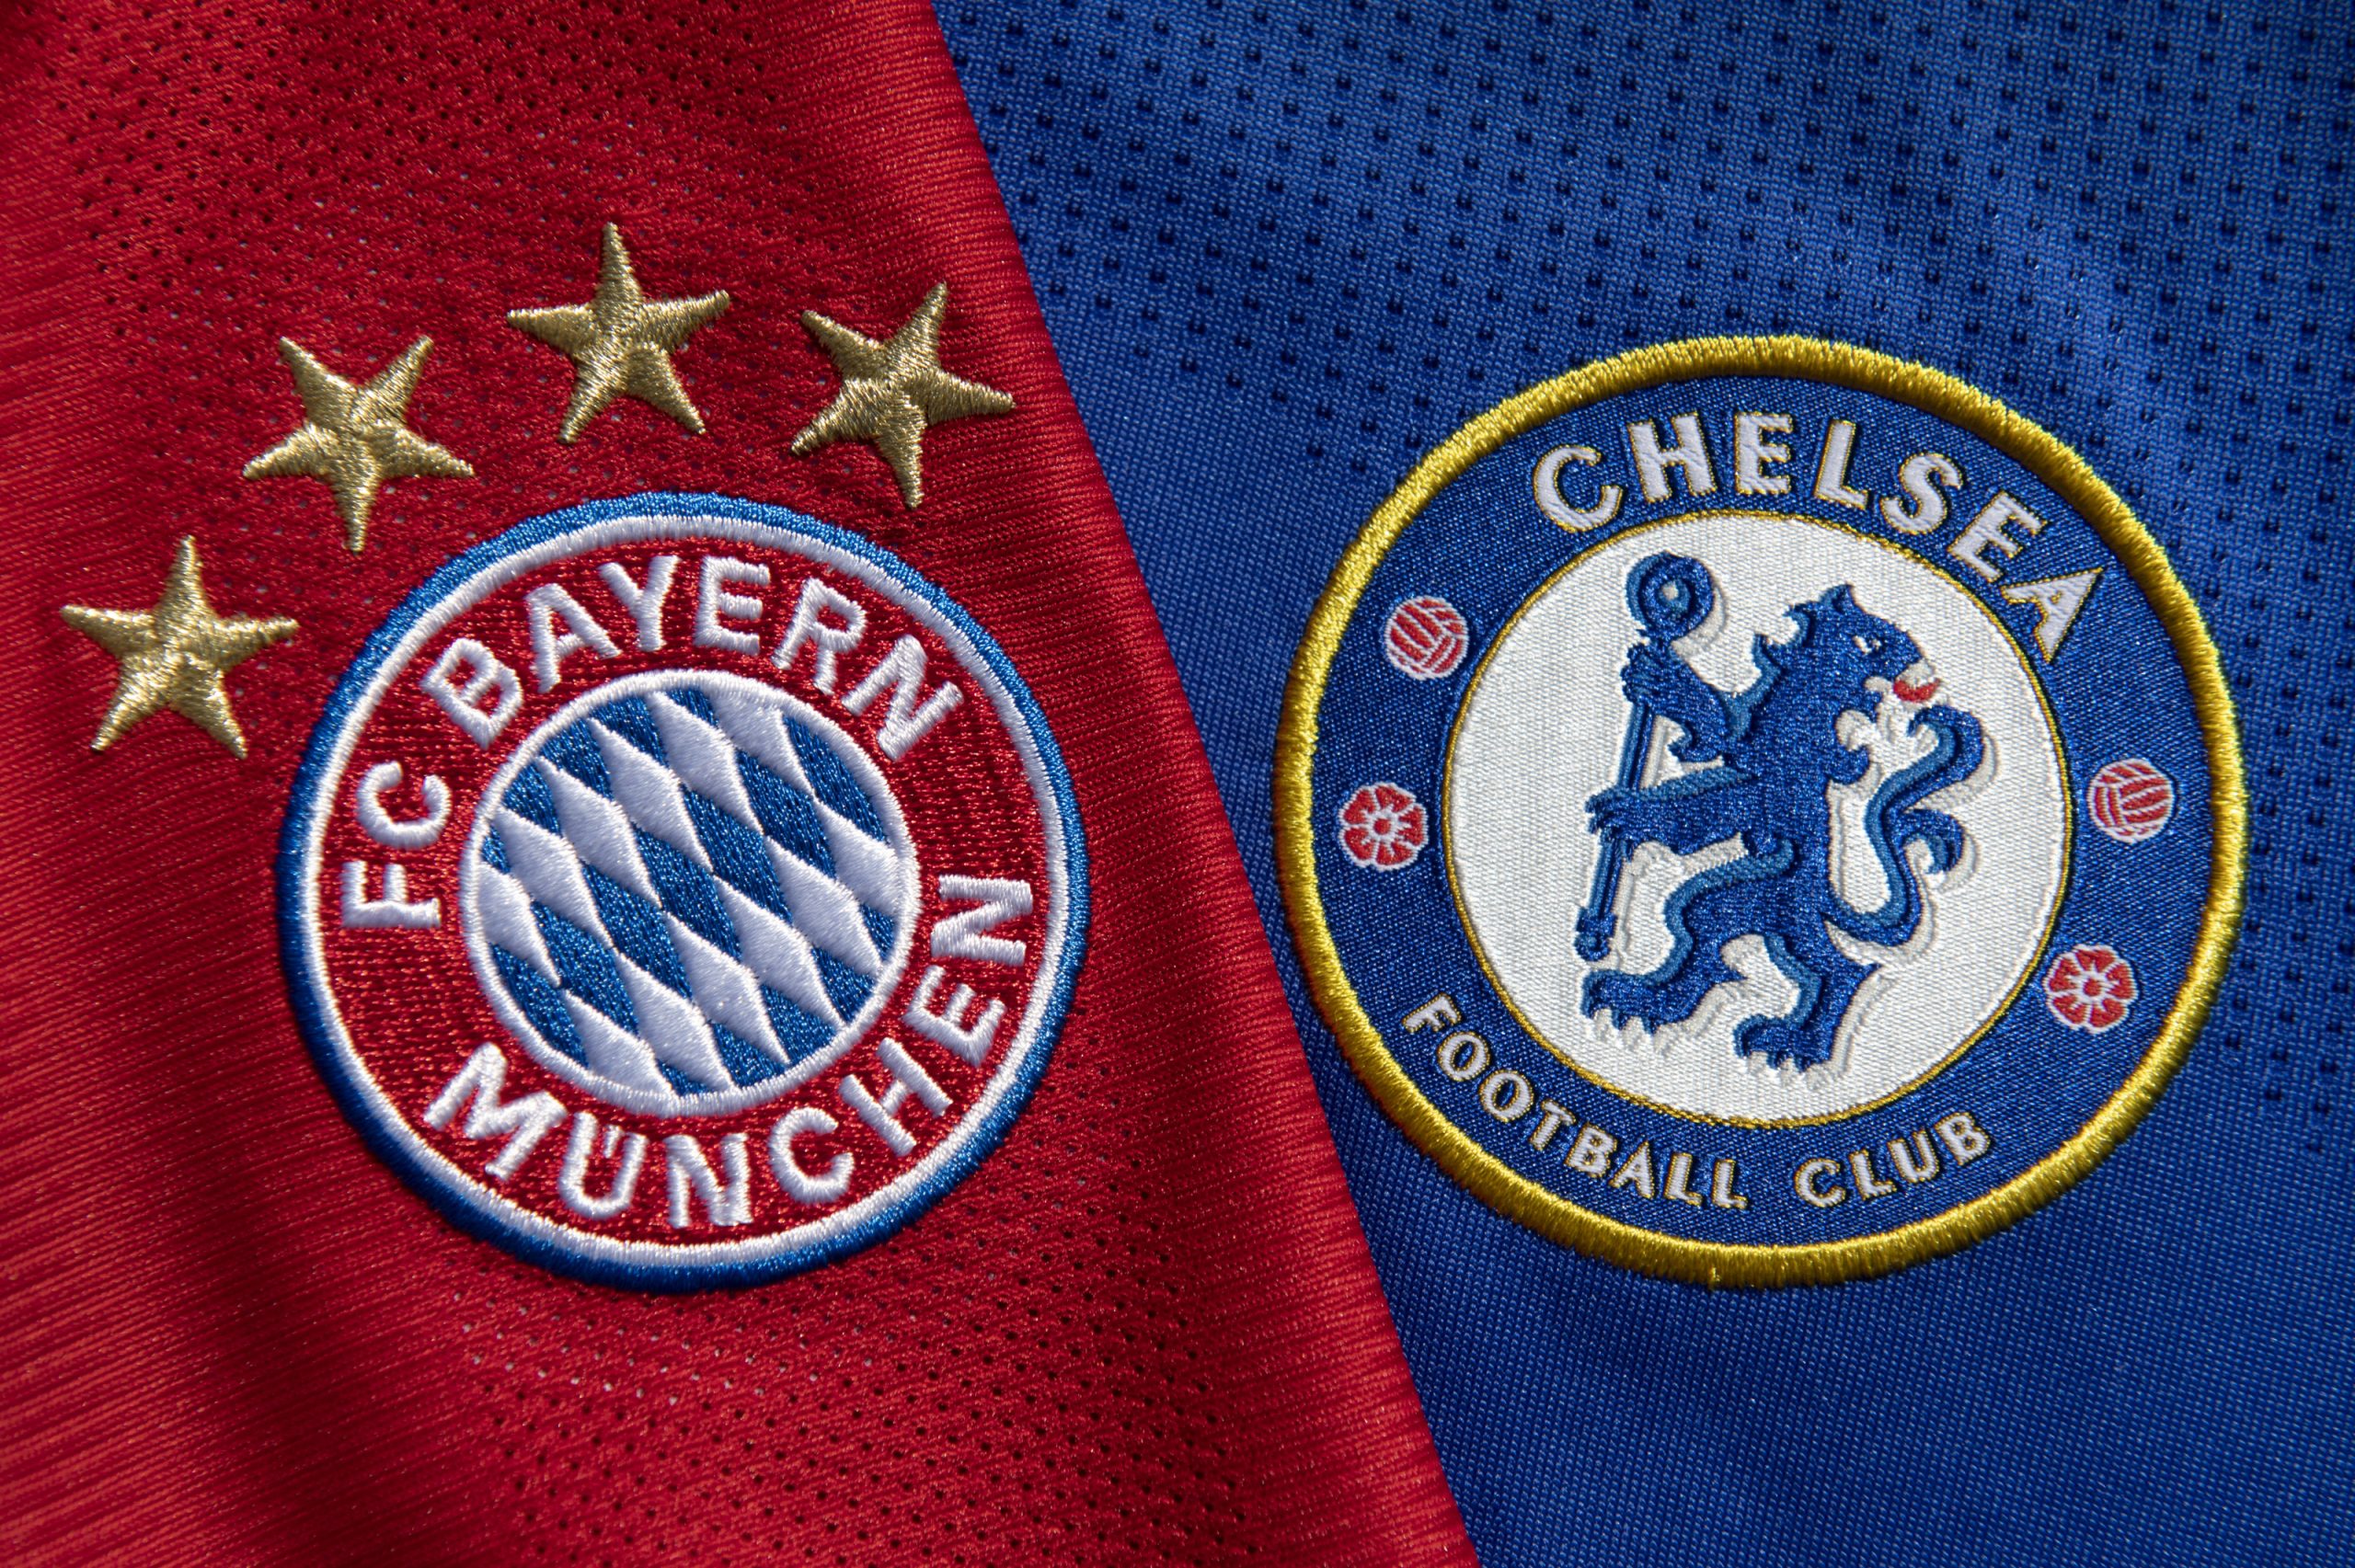 Bayern Munich Is Looking To Sign This Chelsea Player; Will This Deal Happen?